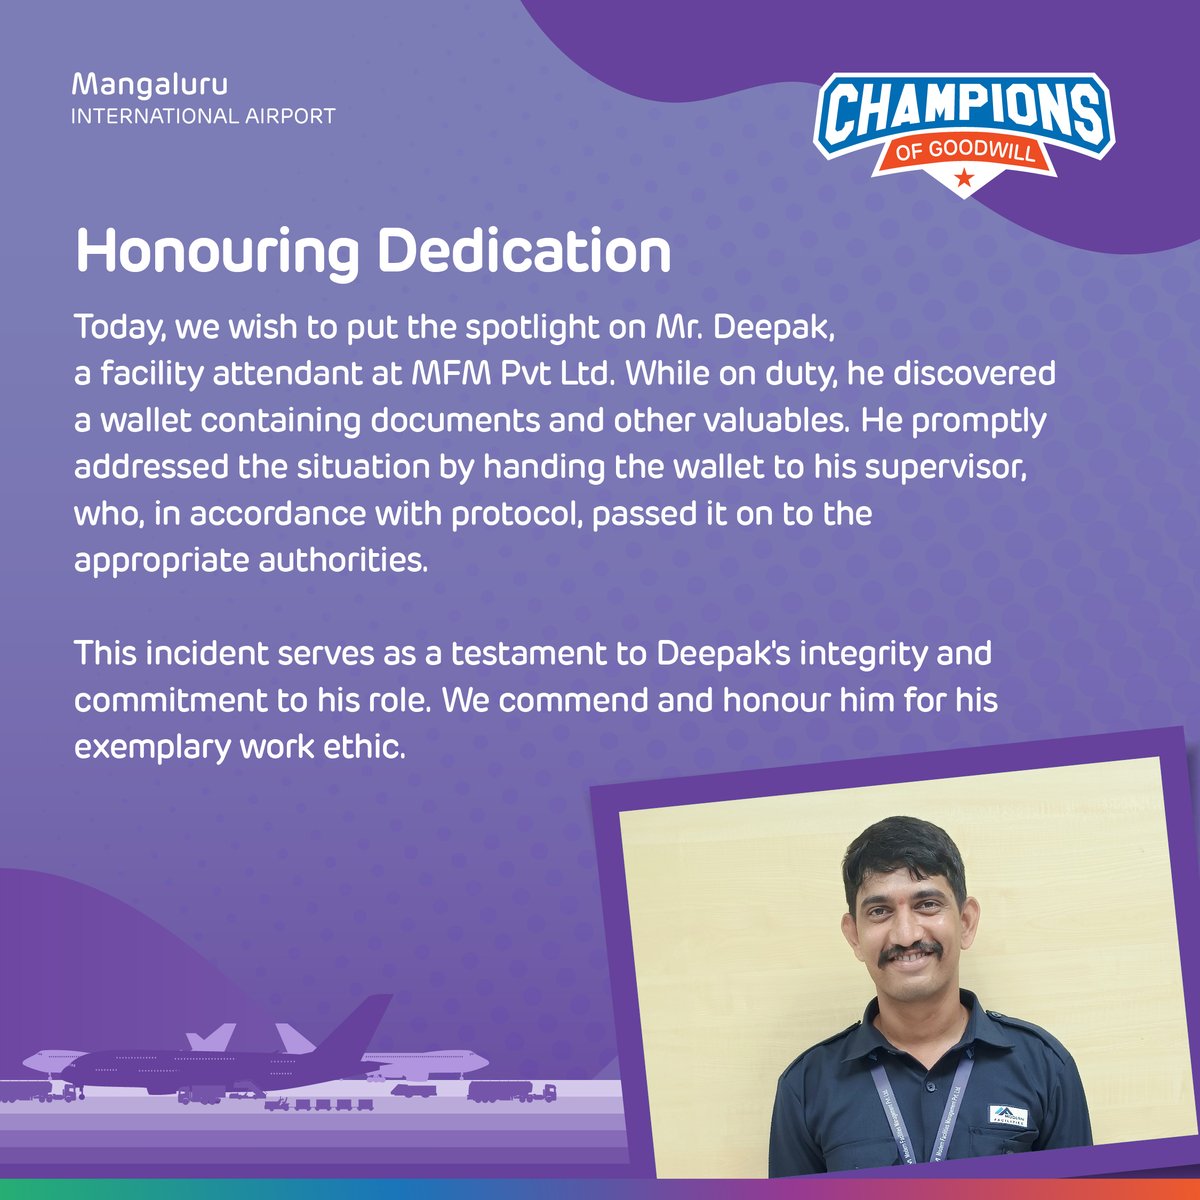 #MangaluruAirport commends Mr. Deepak, a facility attendant at MFM Pvt Ltd, for his integrity and dedication to customer service. Thank you for setting a stellar example and embodying the values of our #GatewayToGoodness. #MangaluruAirport #ChampionsOfGoodwill #Airports